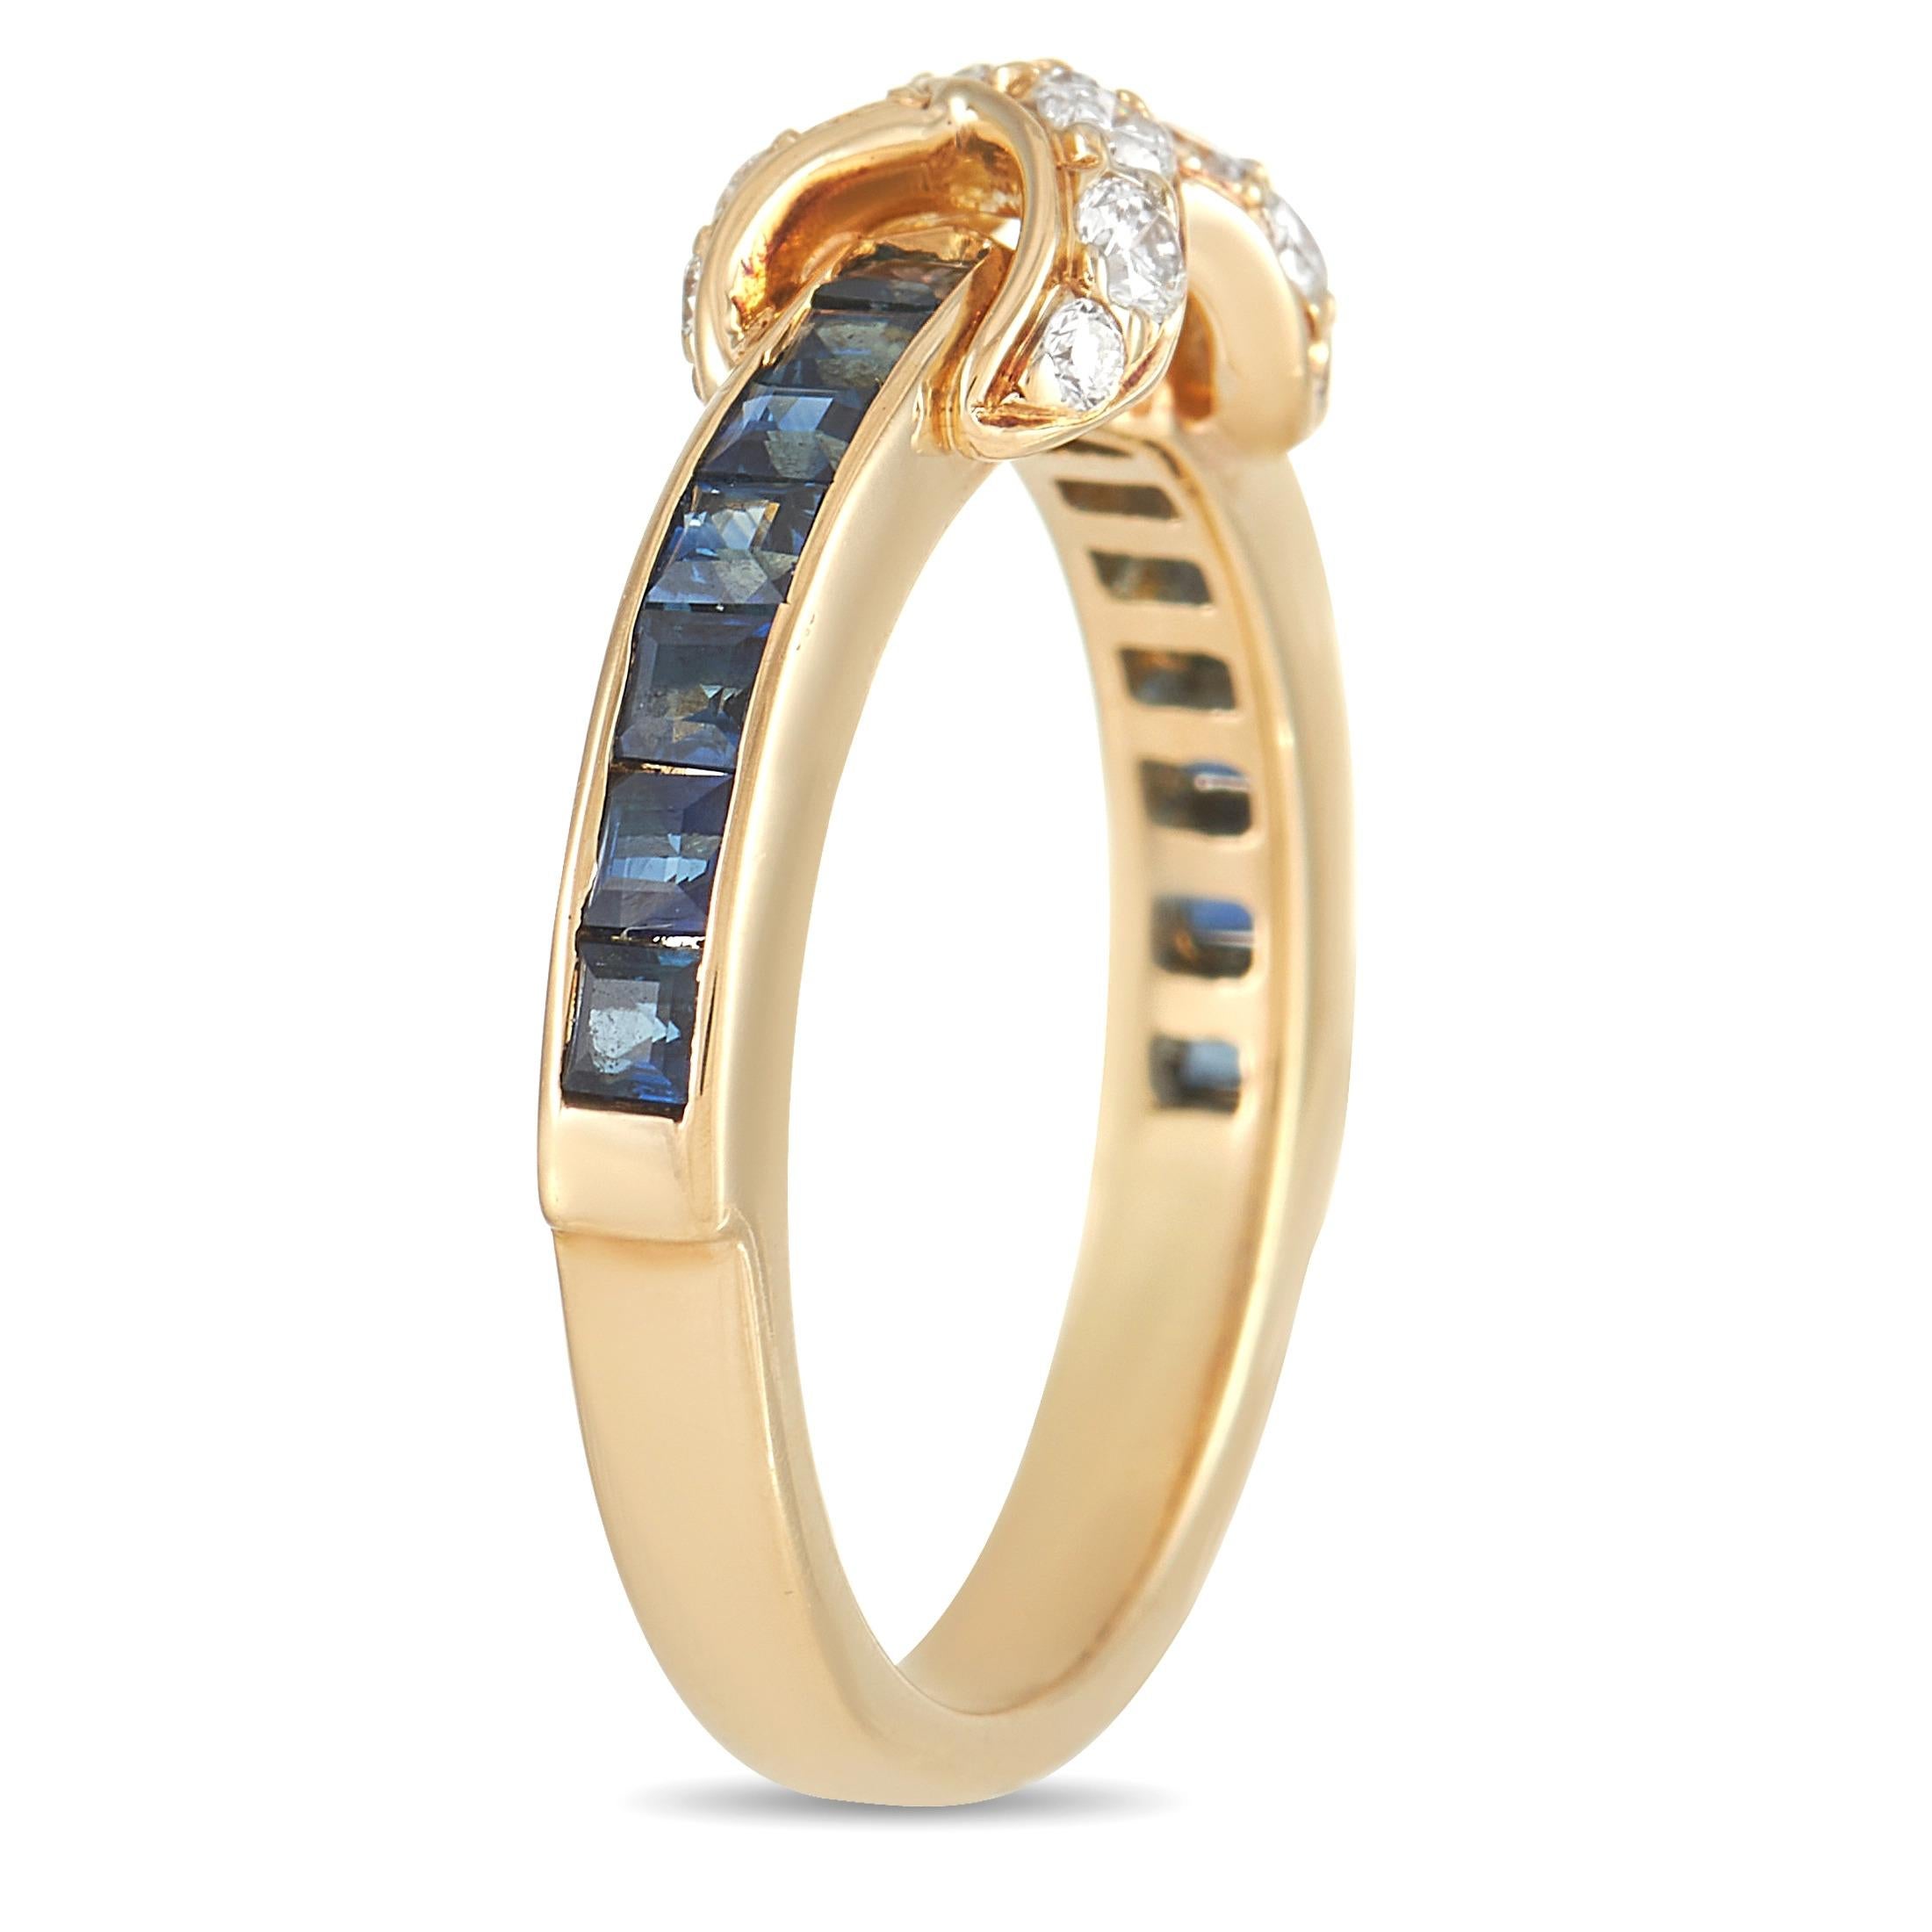 Celebrate love that goes on and on and on with this Tiffany & Co. 18K Yellow Gold Diamond and Sapphire Infinity Ring. The 2mm yellow gold band has its front adorned with a channel of beautiful blue sapphires. Embracing the center is a diamond-lined